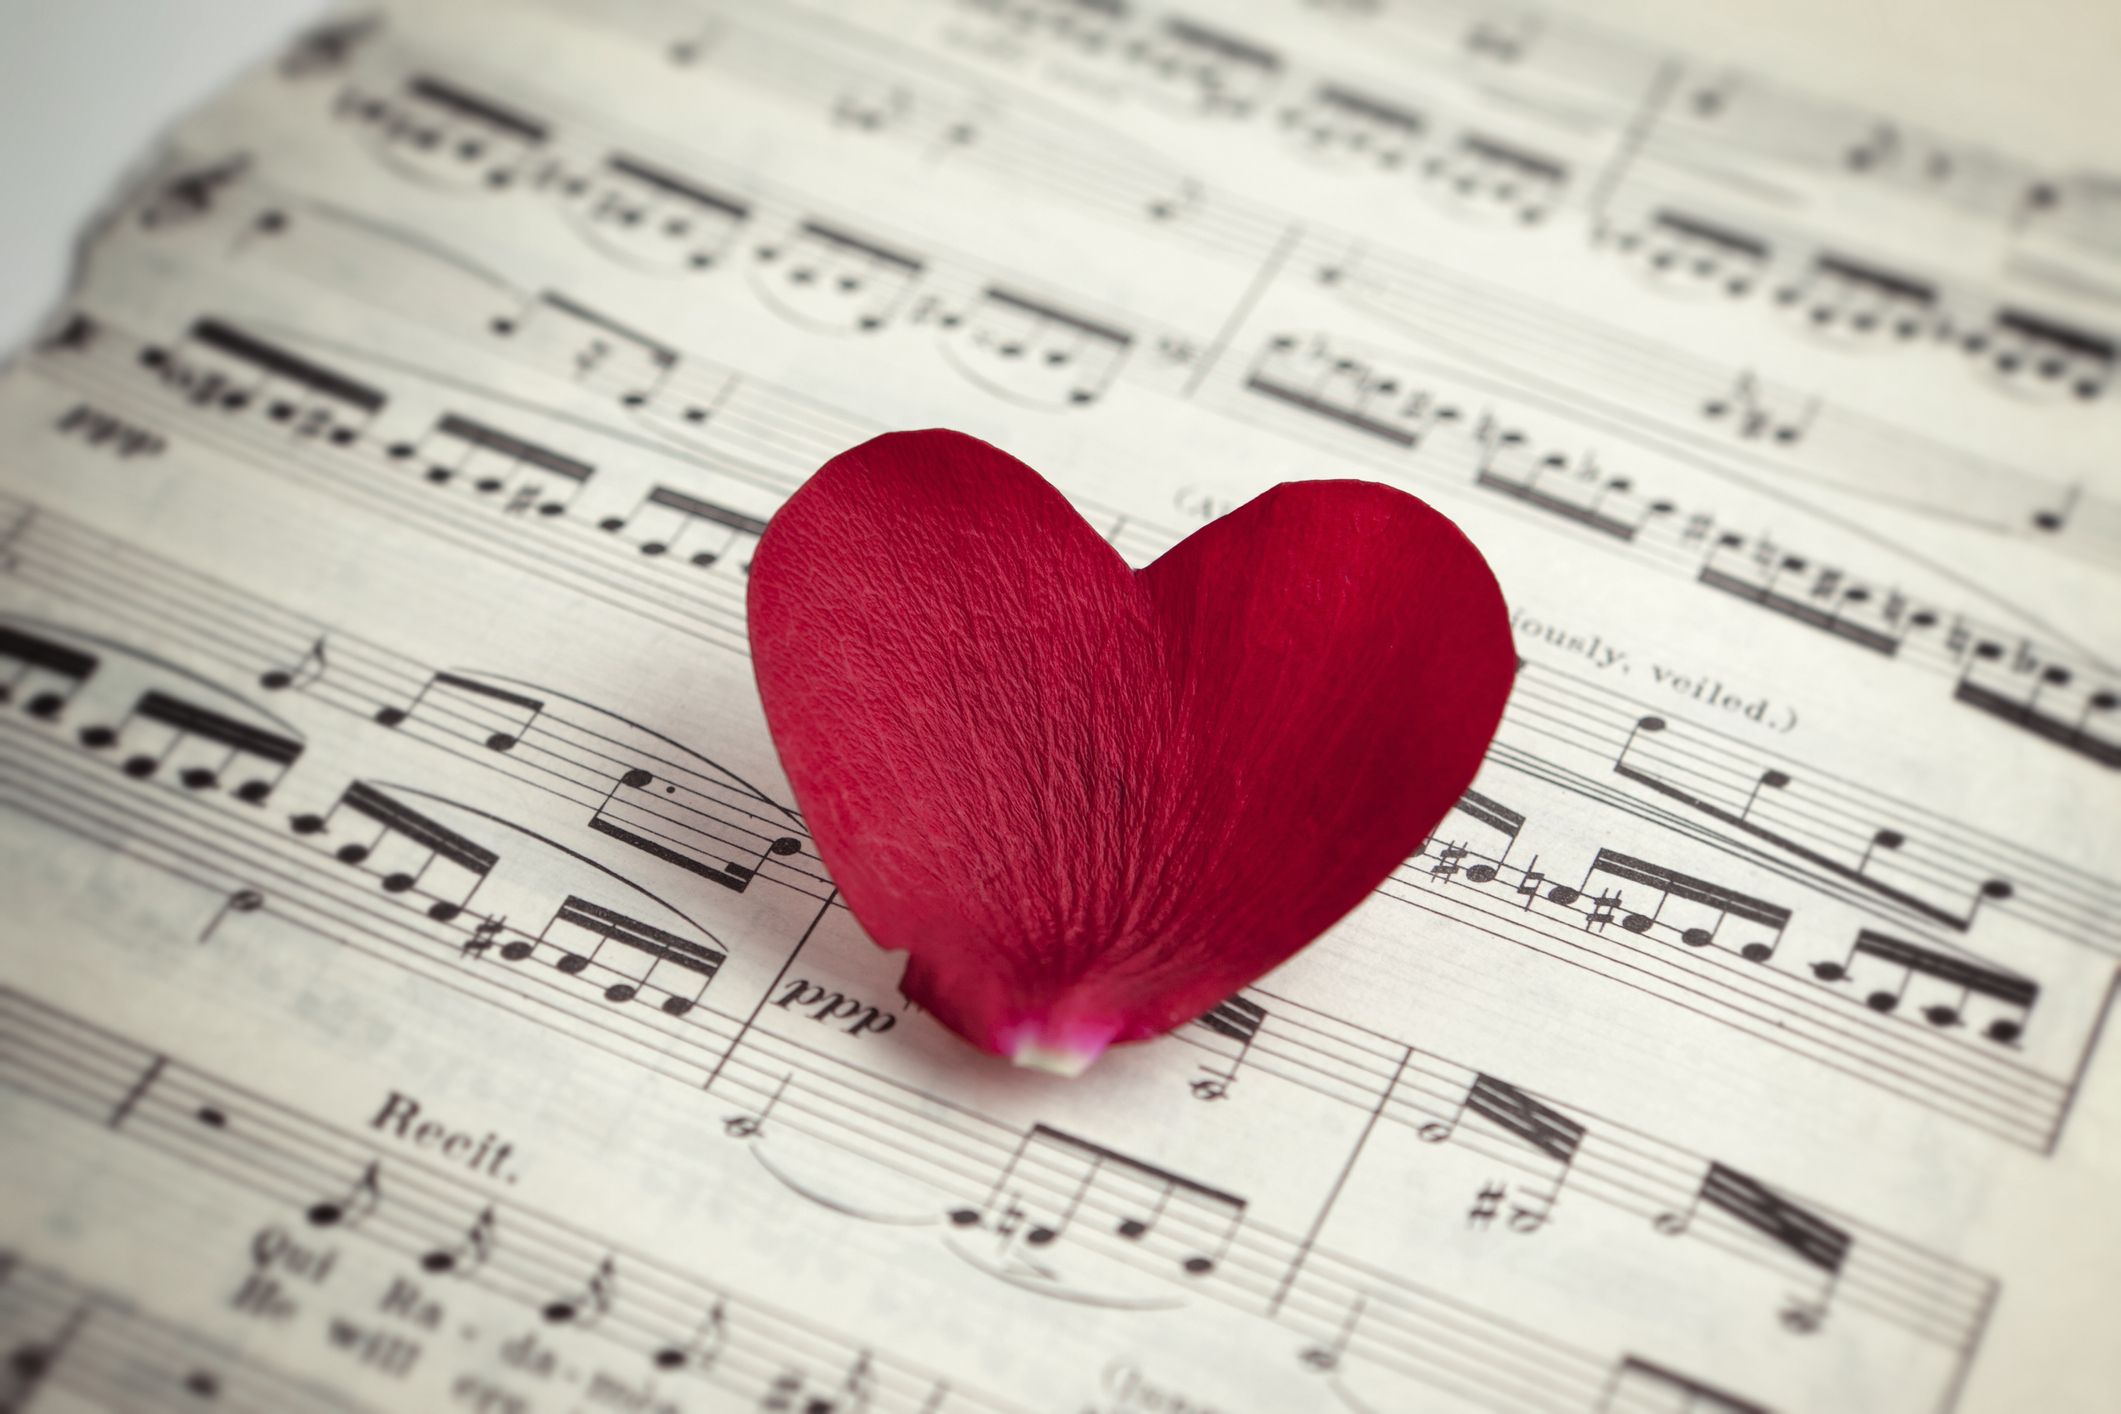 40 Best Valentine's Day Songs - Love Songs for Valentine's Day